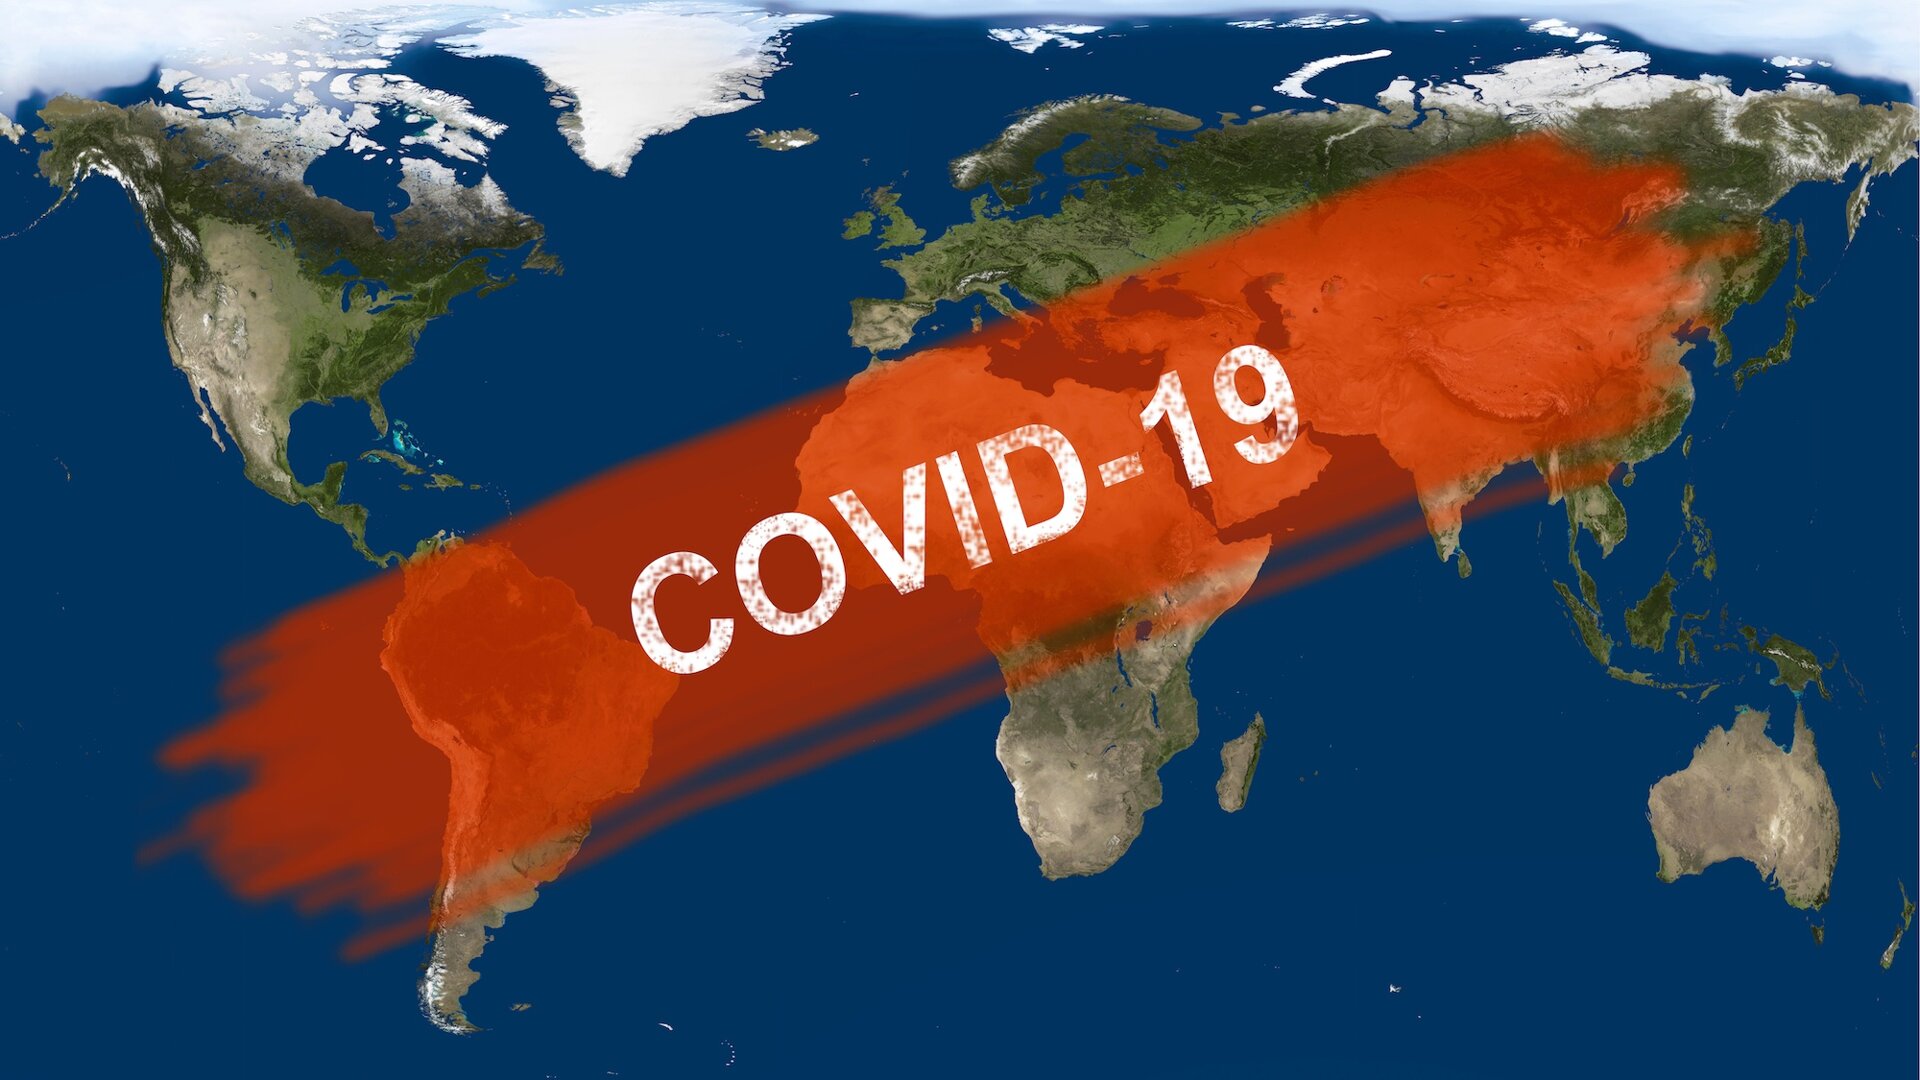 How is COVID-19 affecting the dental industry?